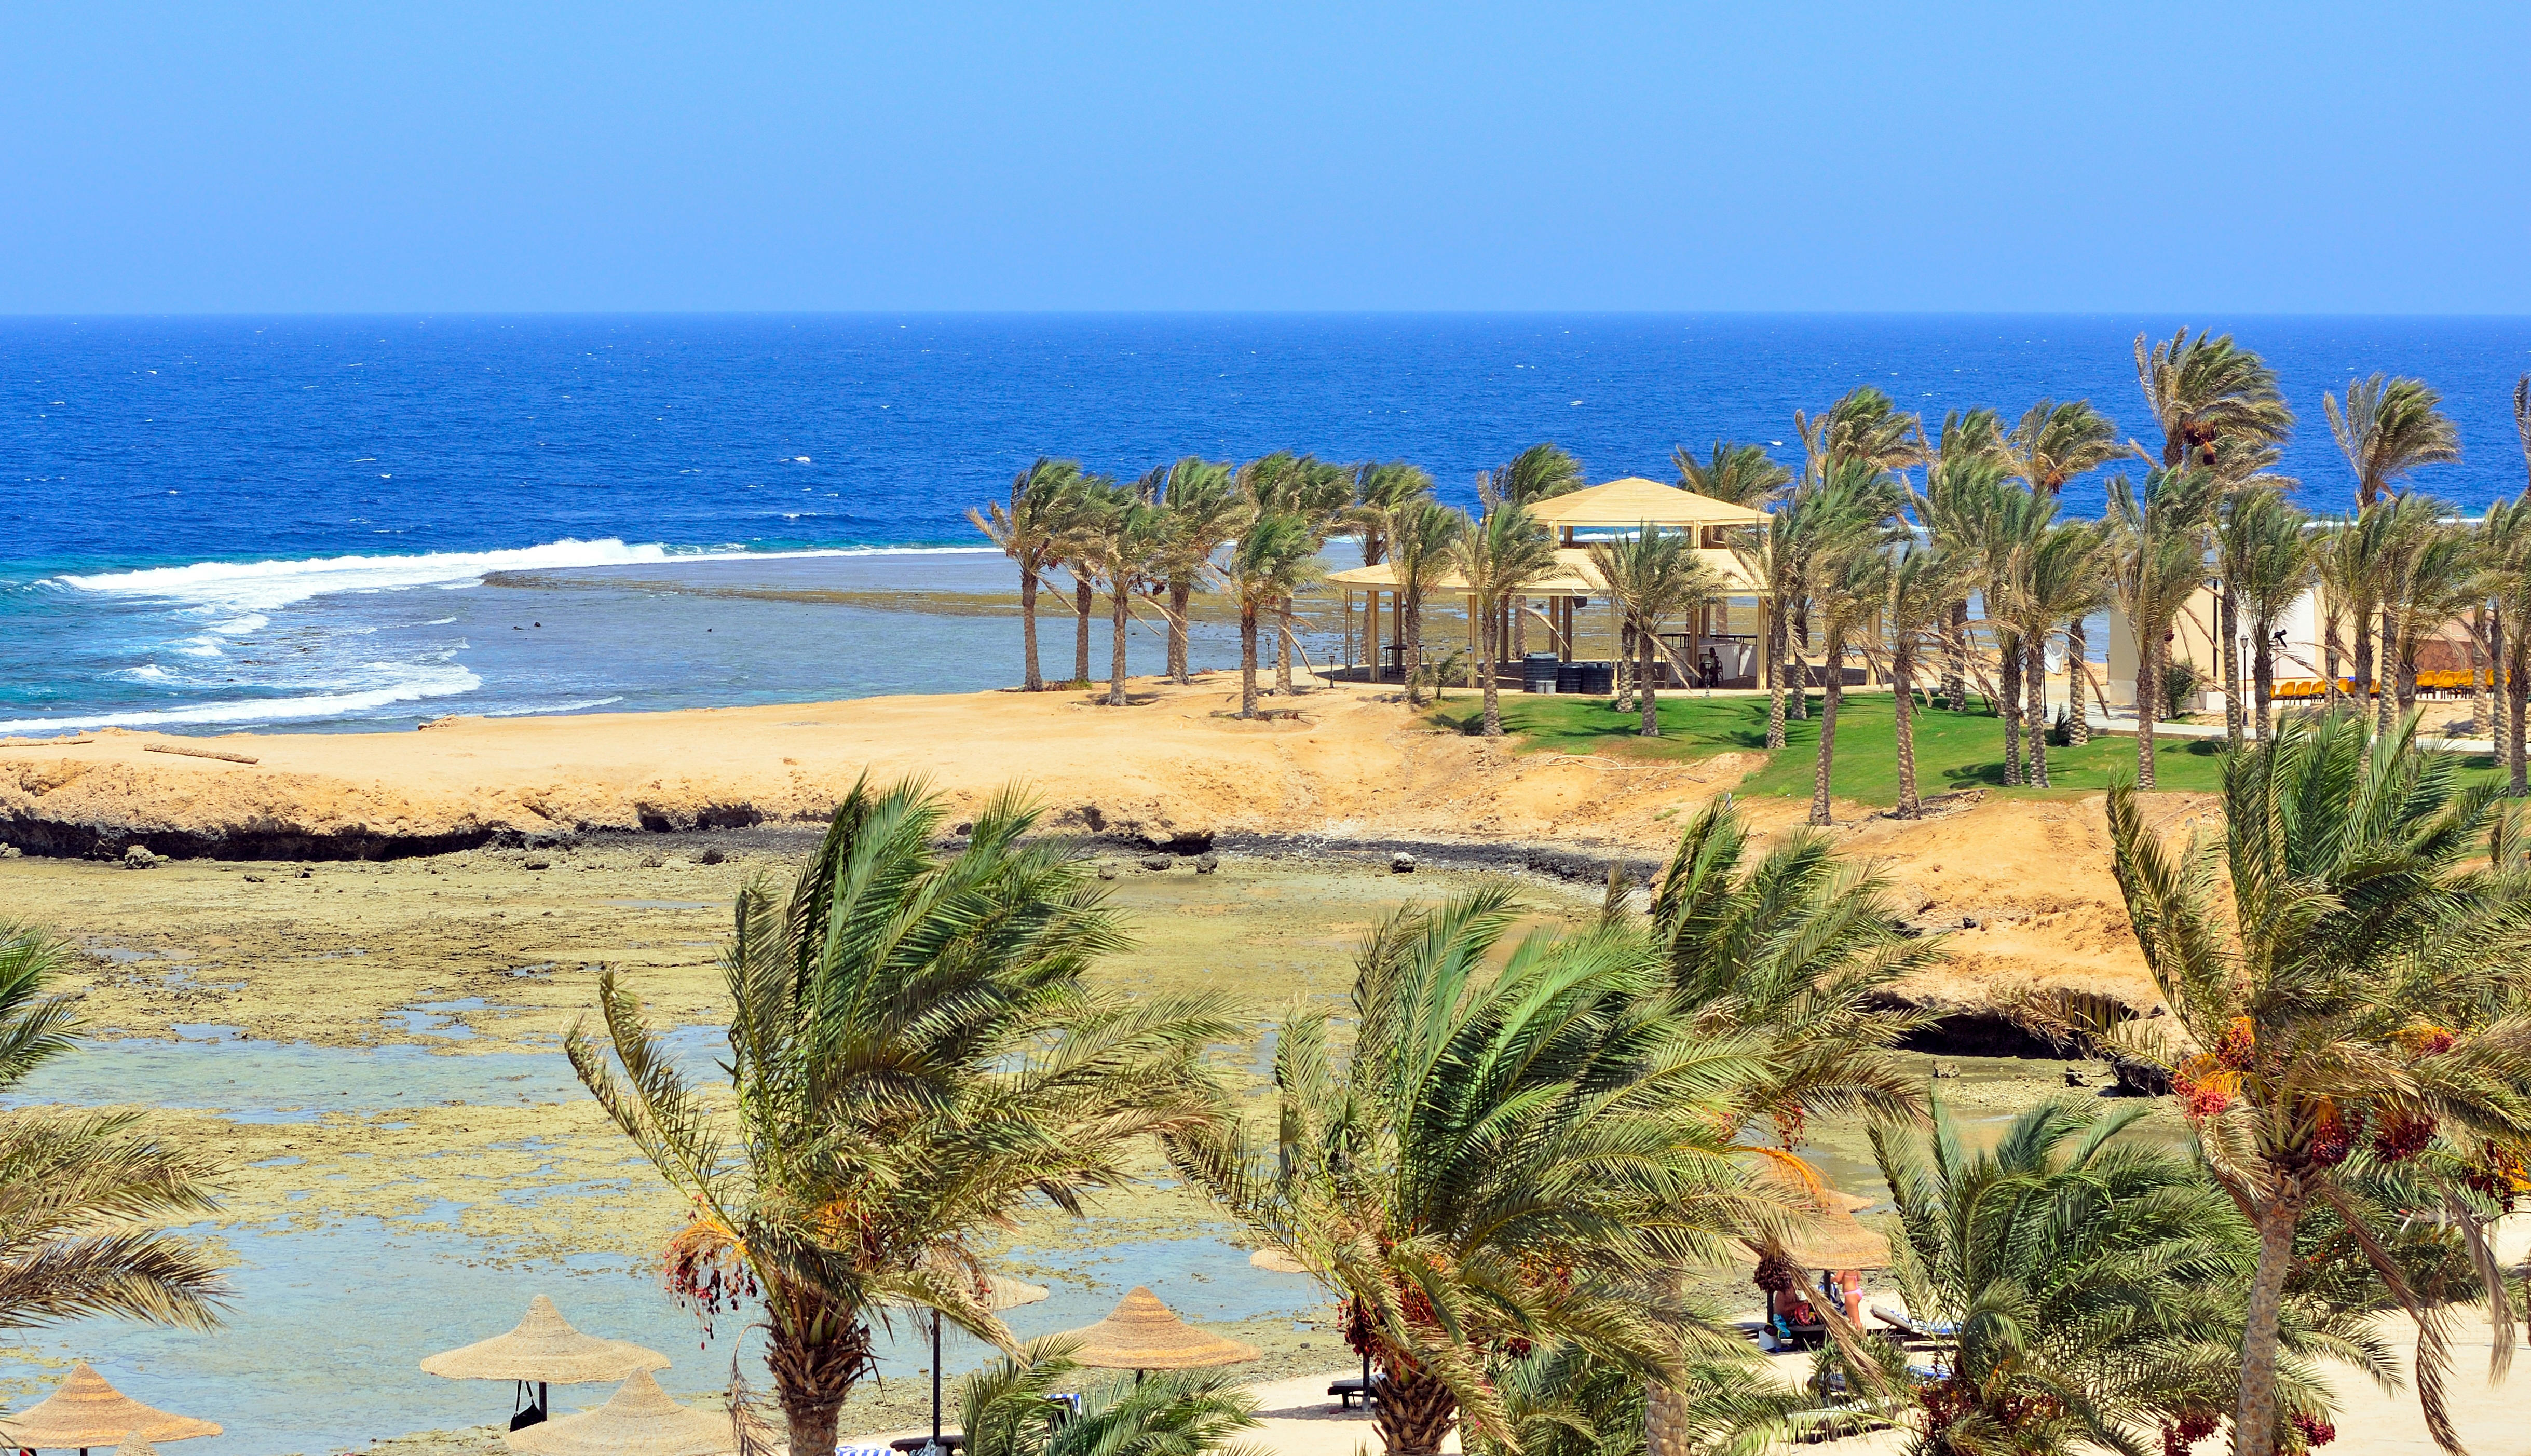 The resort town of Marsa Alam in Egypt